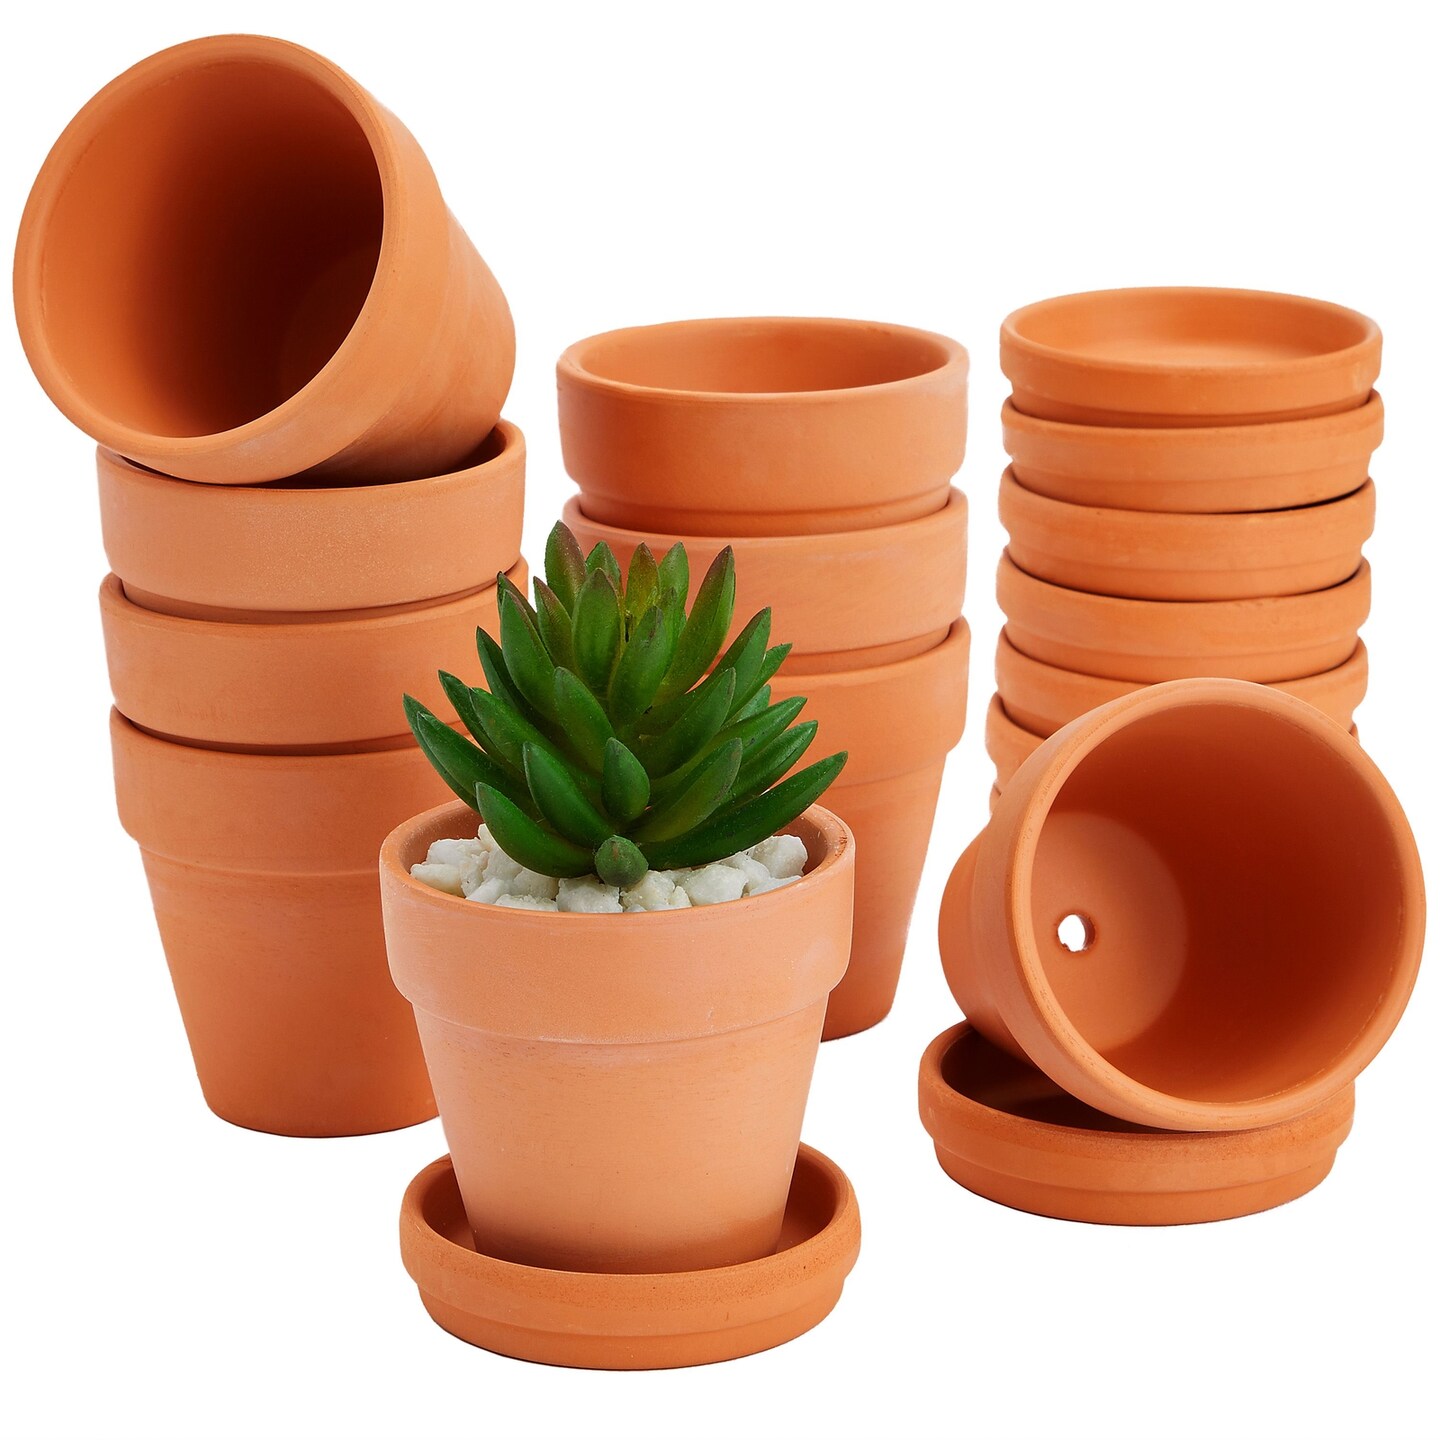 Large Terra Cotta Pots with Saucer- 4 Pack Large 6'' Terra Cotta Plant Pot  with Drainage Hole, Flower Pot with Tray, Terracotta Pot for Indoor Outdoor